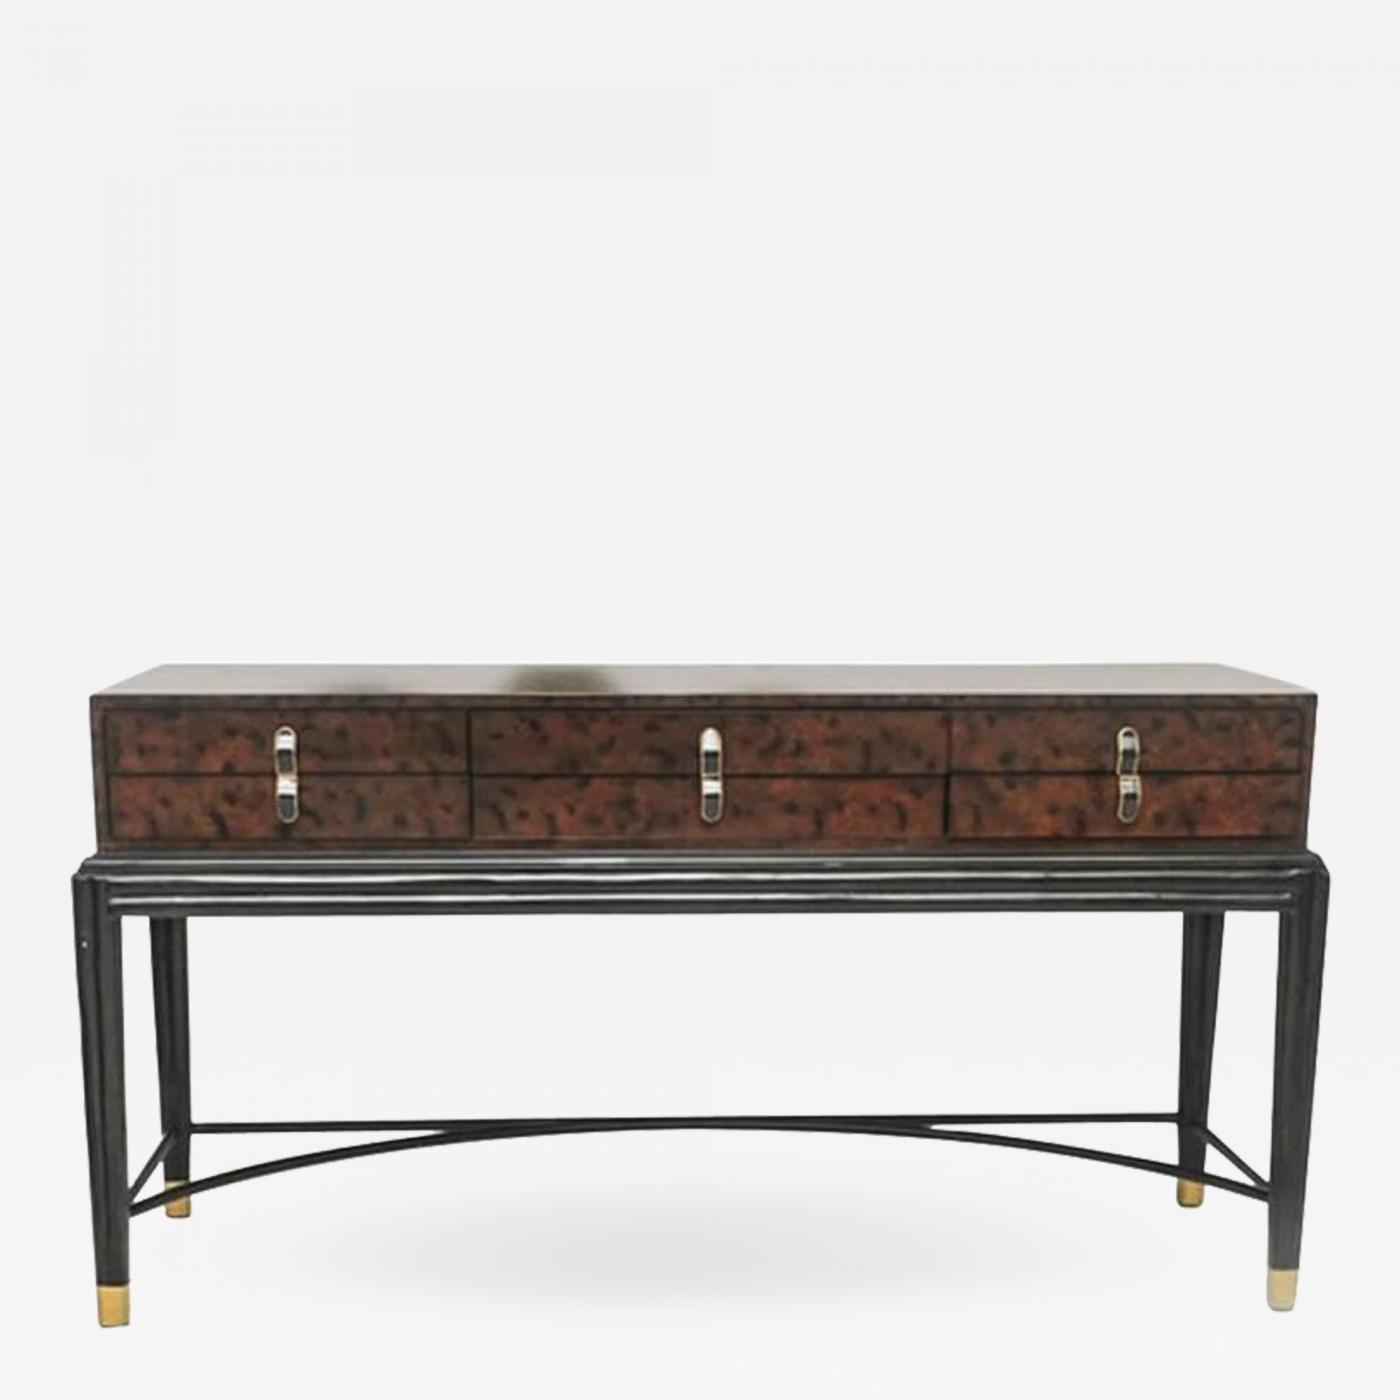 Maitland Smith Stylish Sideboard Or Console Table By Maitland